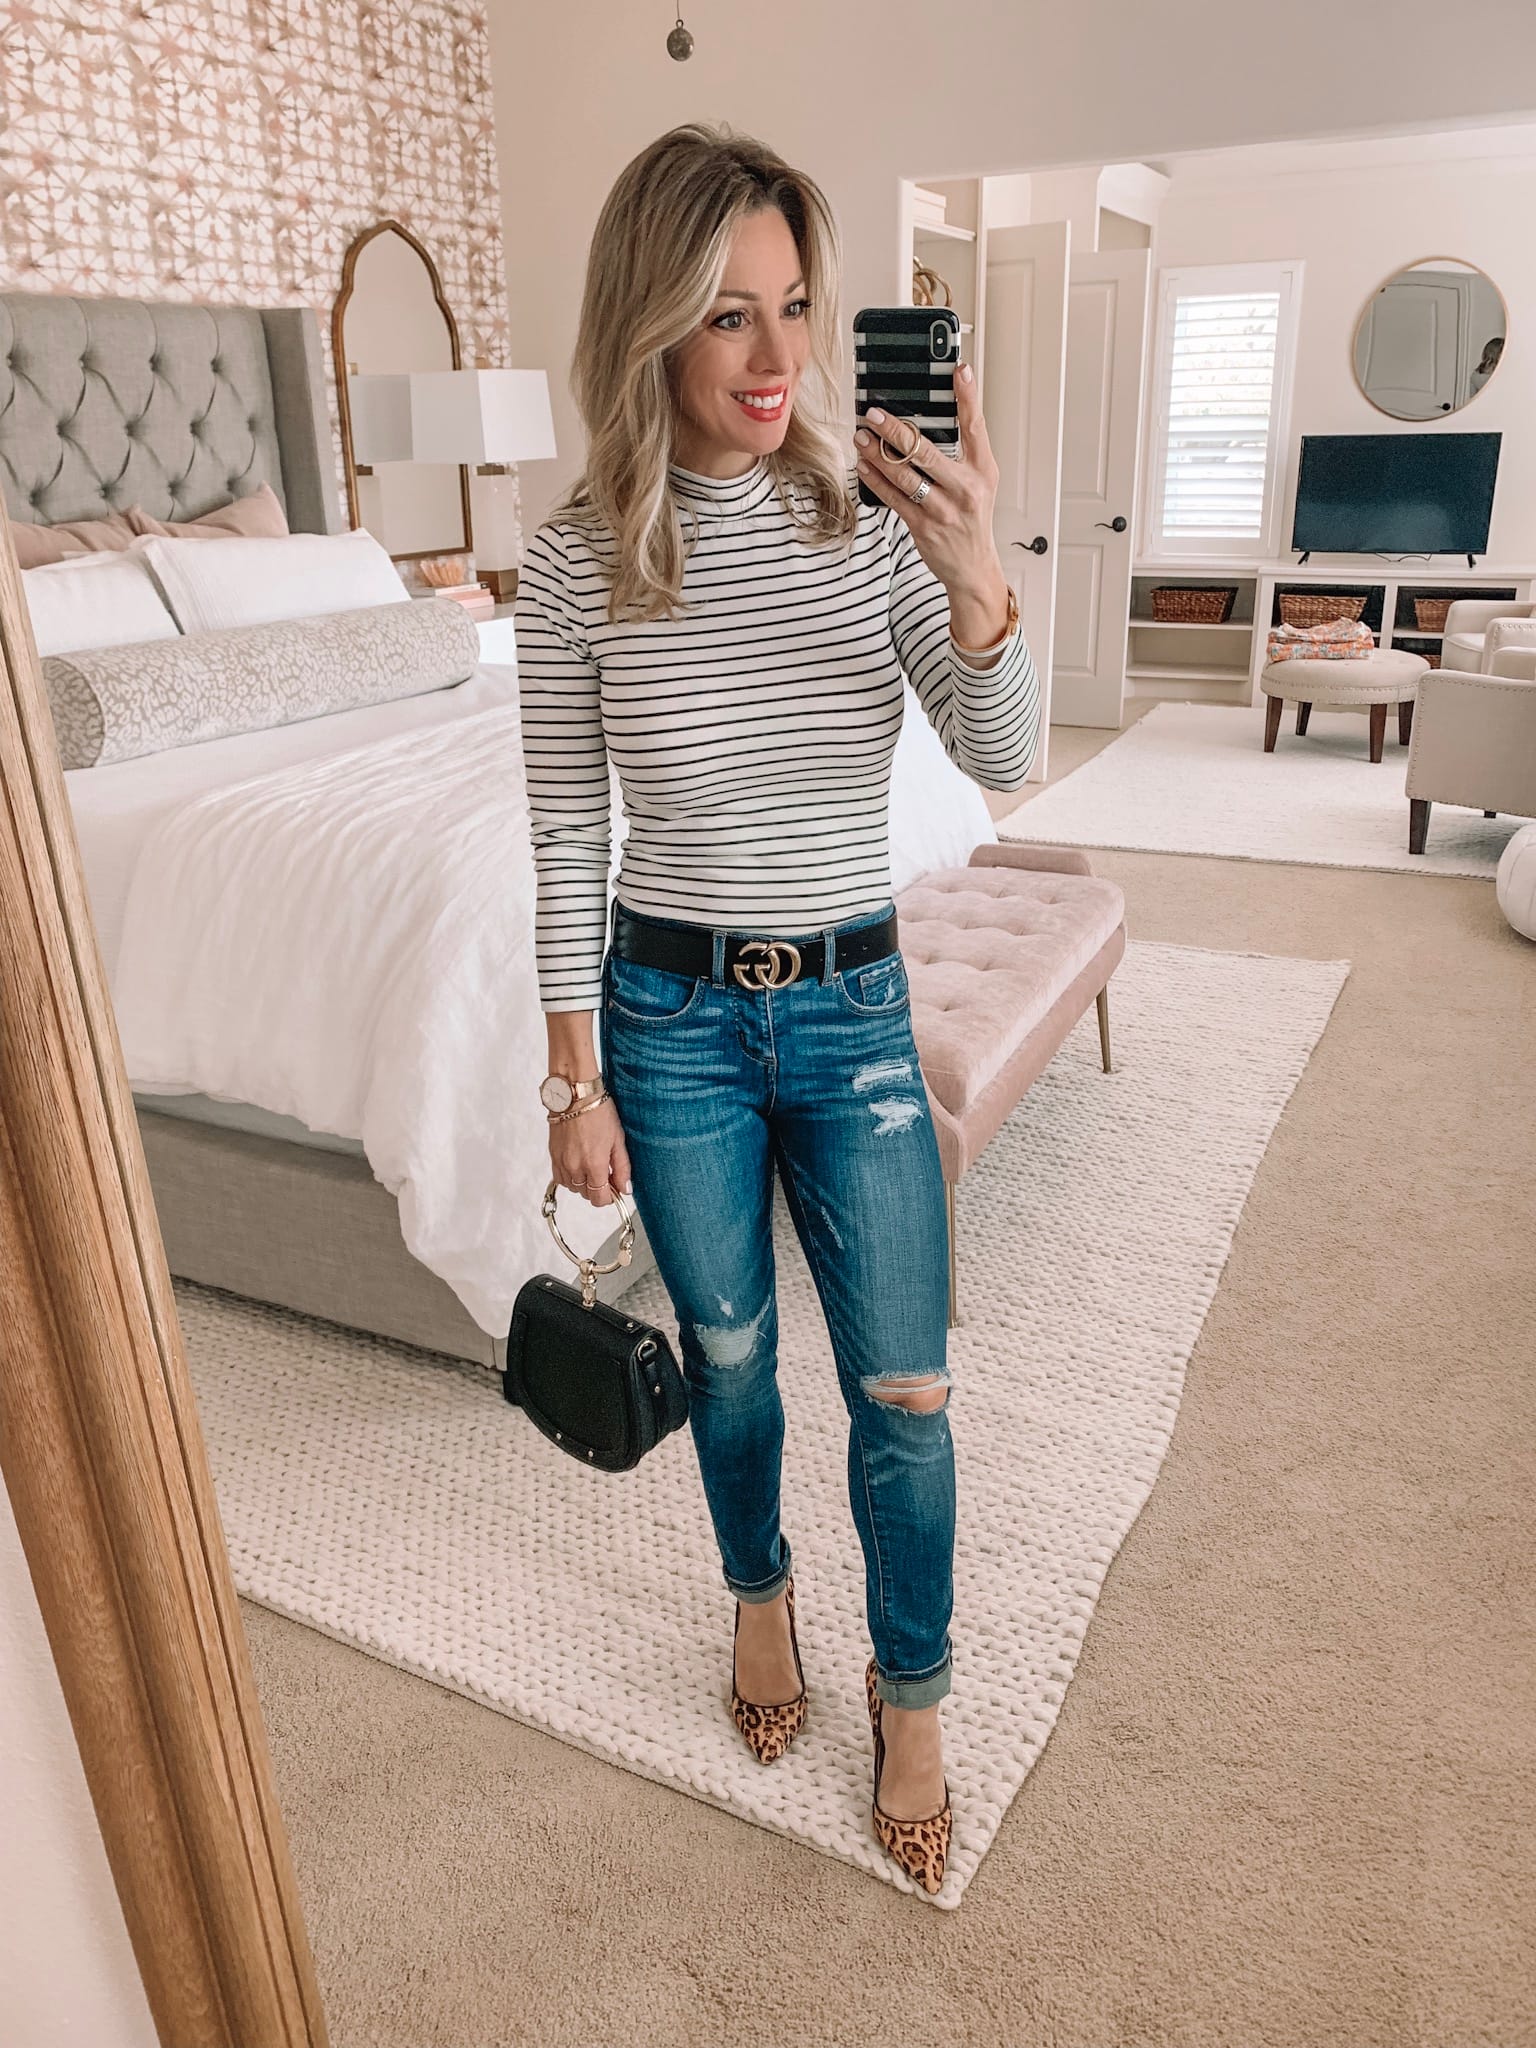 Cute night out outfit - striped top, distressed jeans and leopard heels